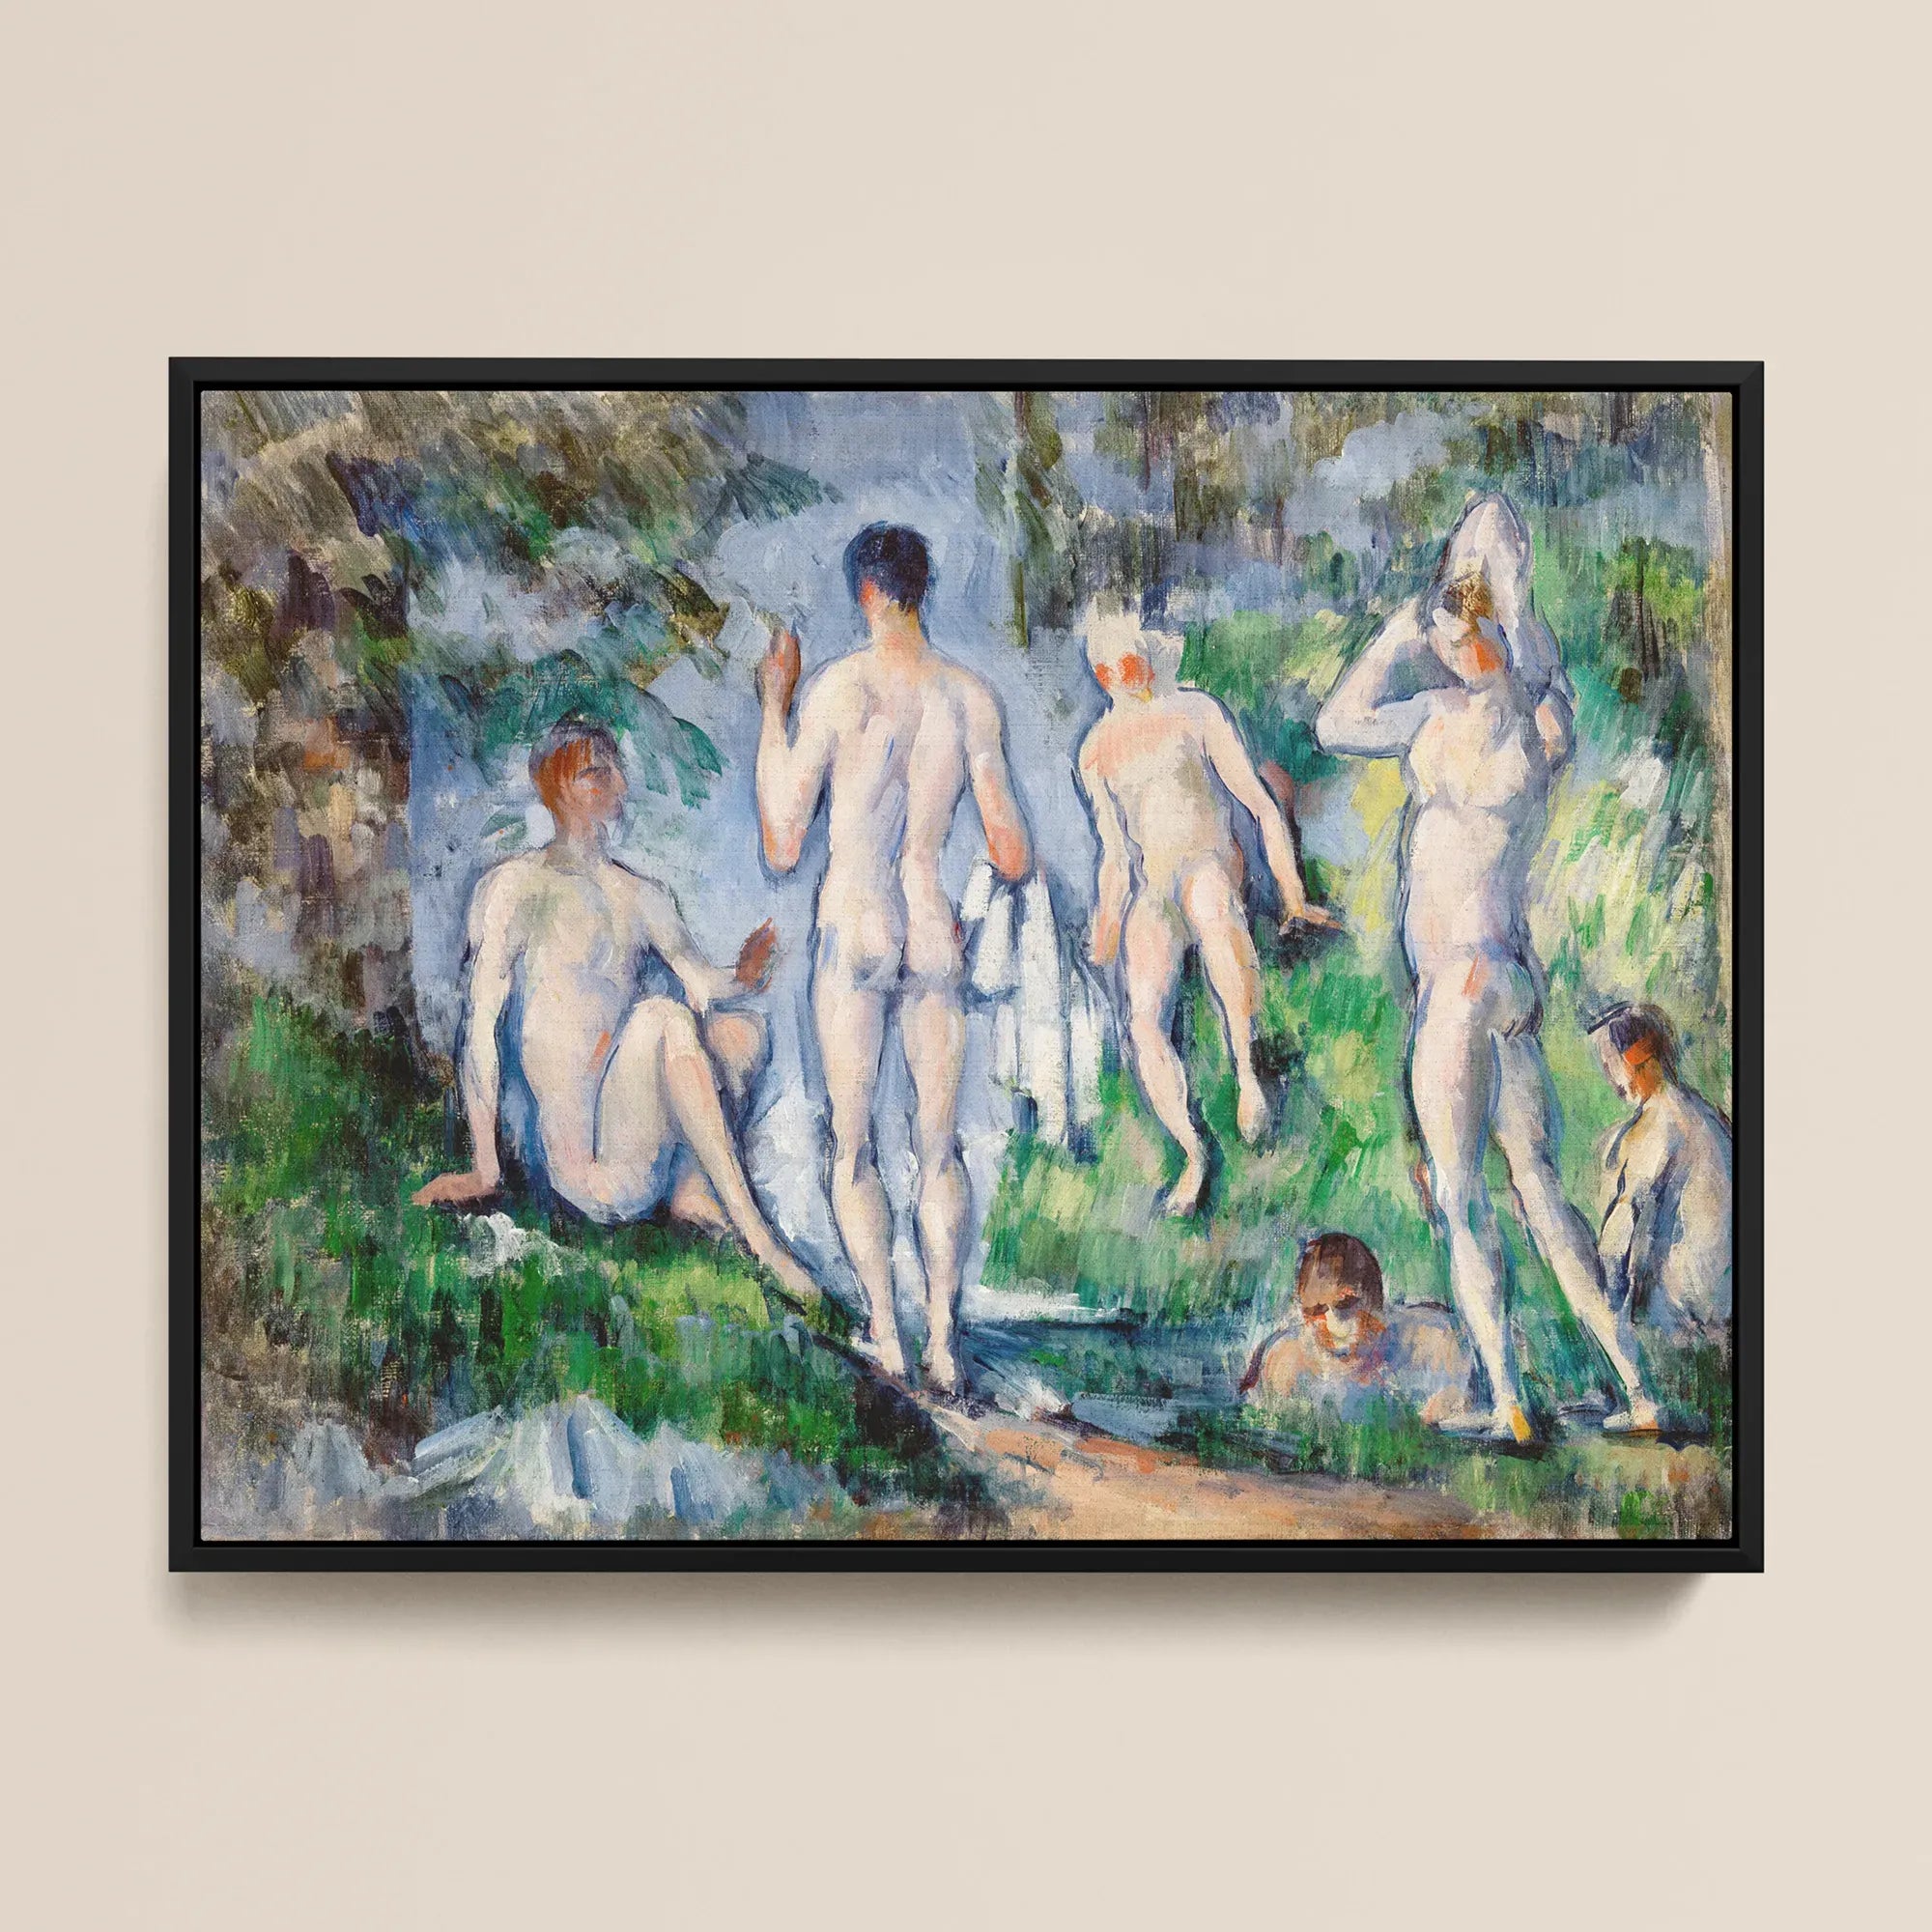 Group Of Bathers - Paul Cézanne Male Nude Float Framed Canvas - Posters Prints & Visual Artwork - Aesthetic Art